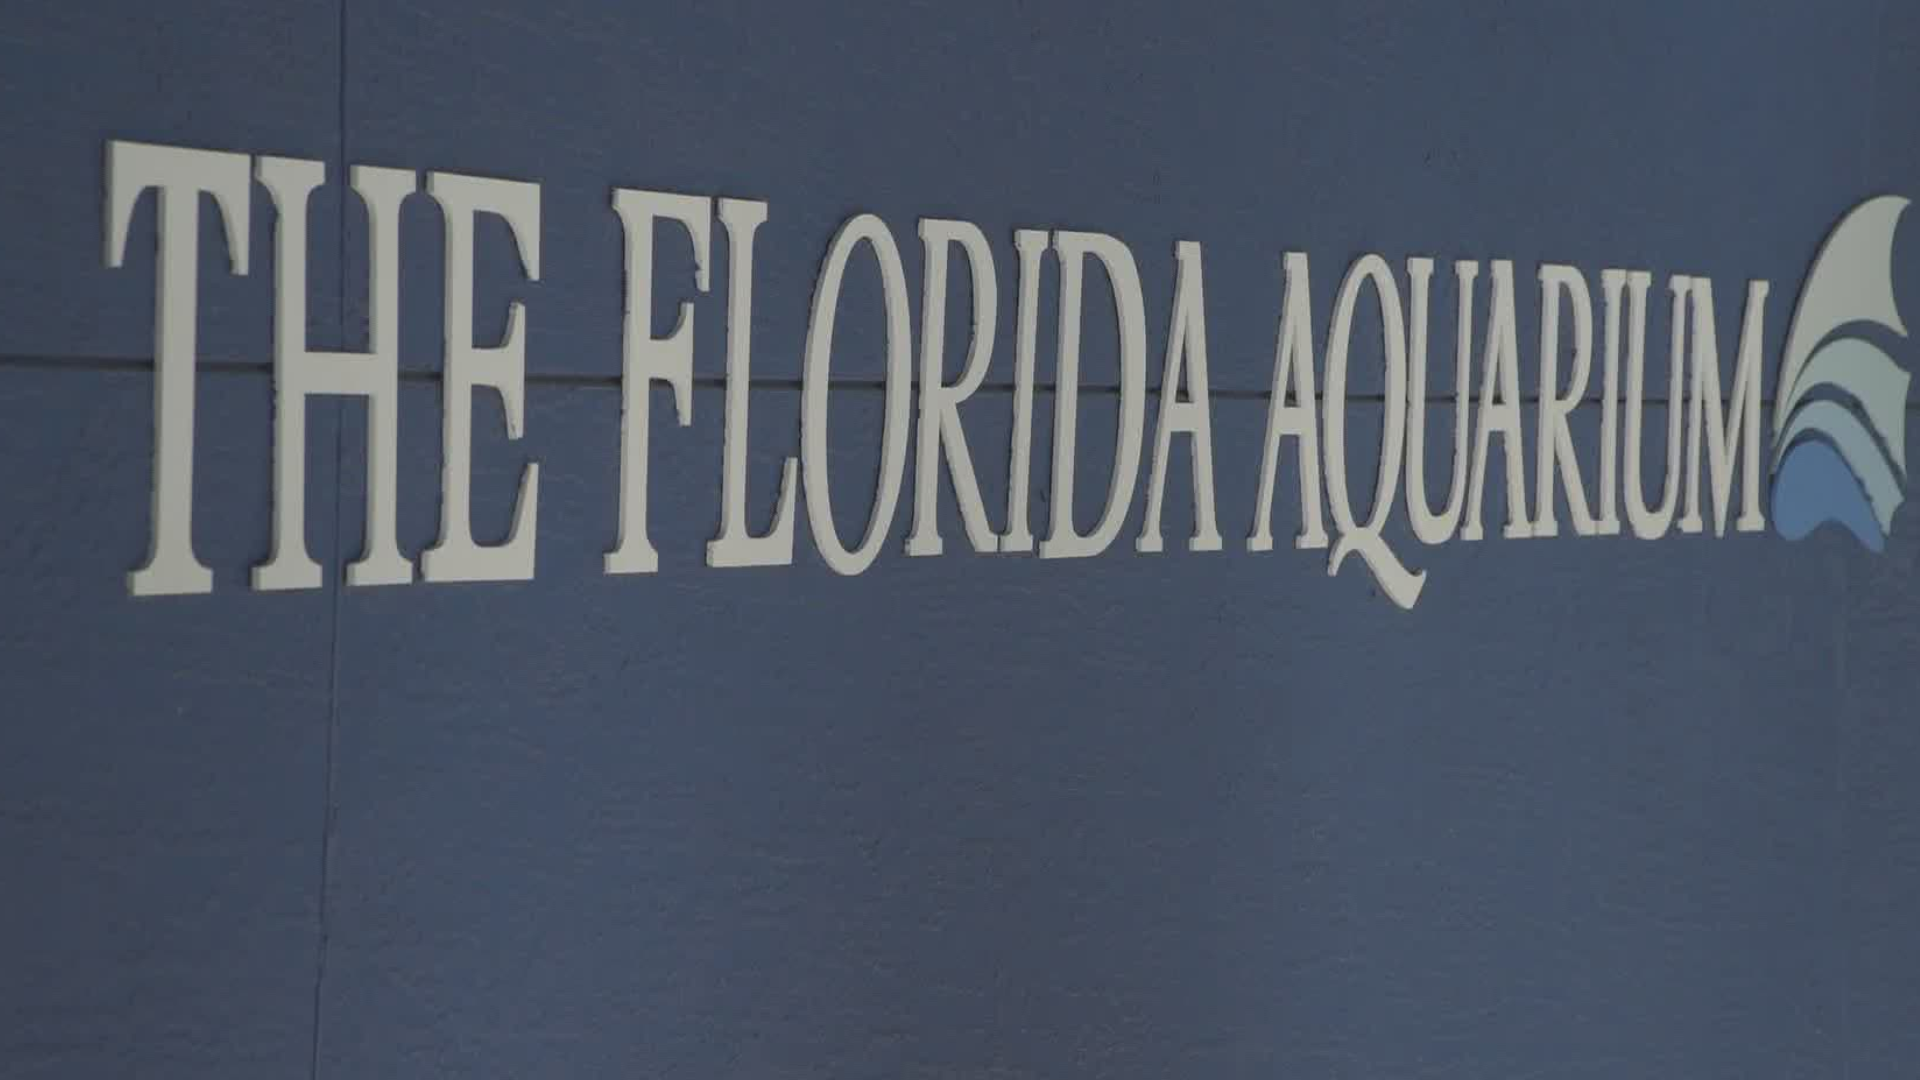 The Florida Aquarium said it will be "touch-free" when it reopens this week.